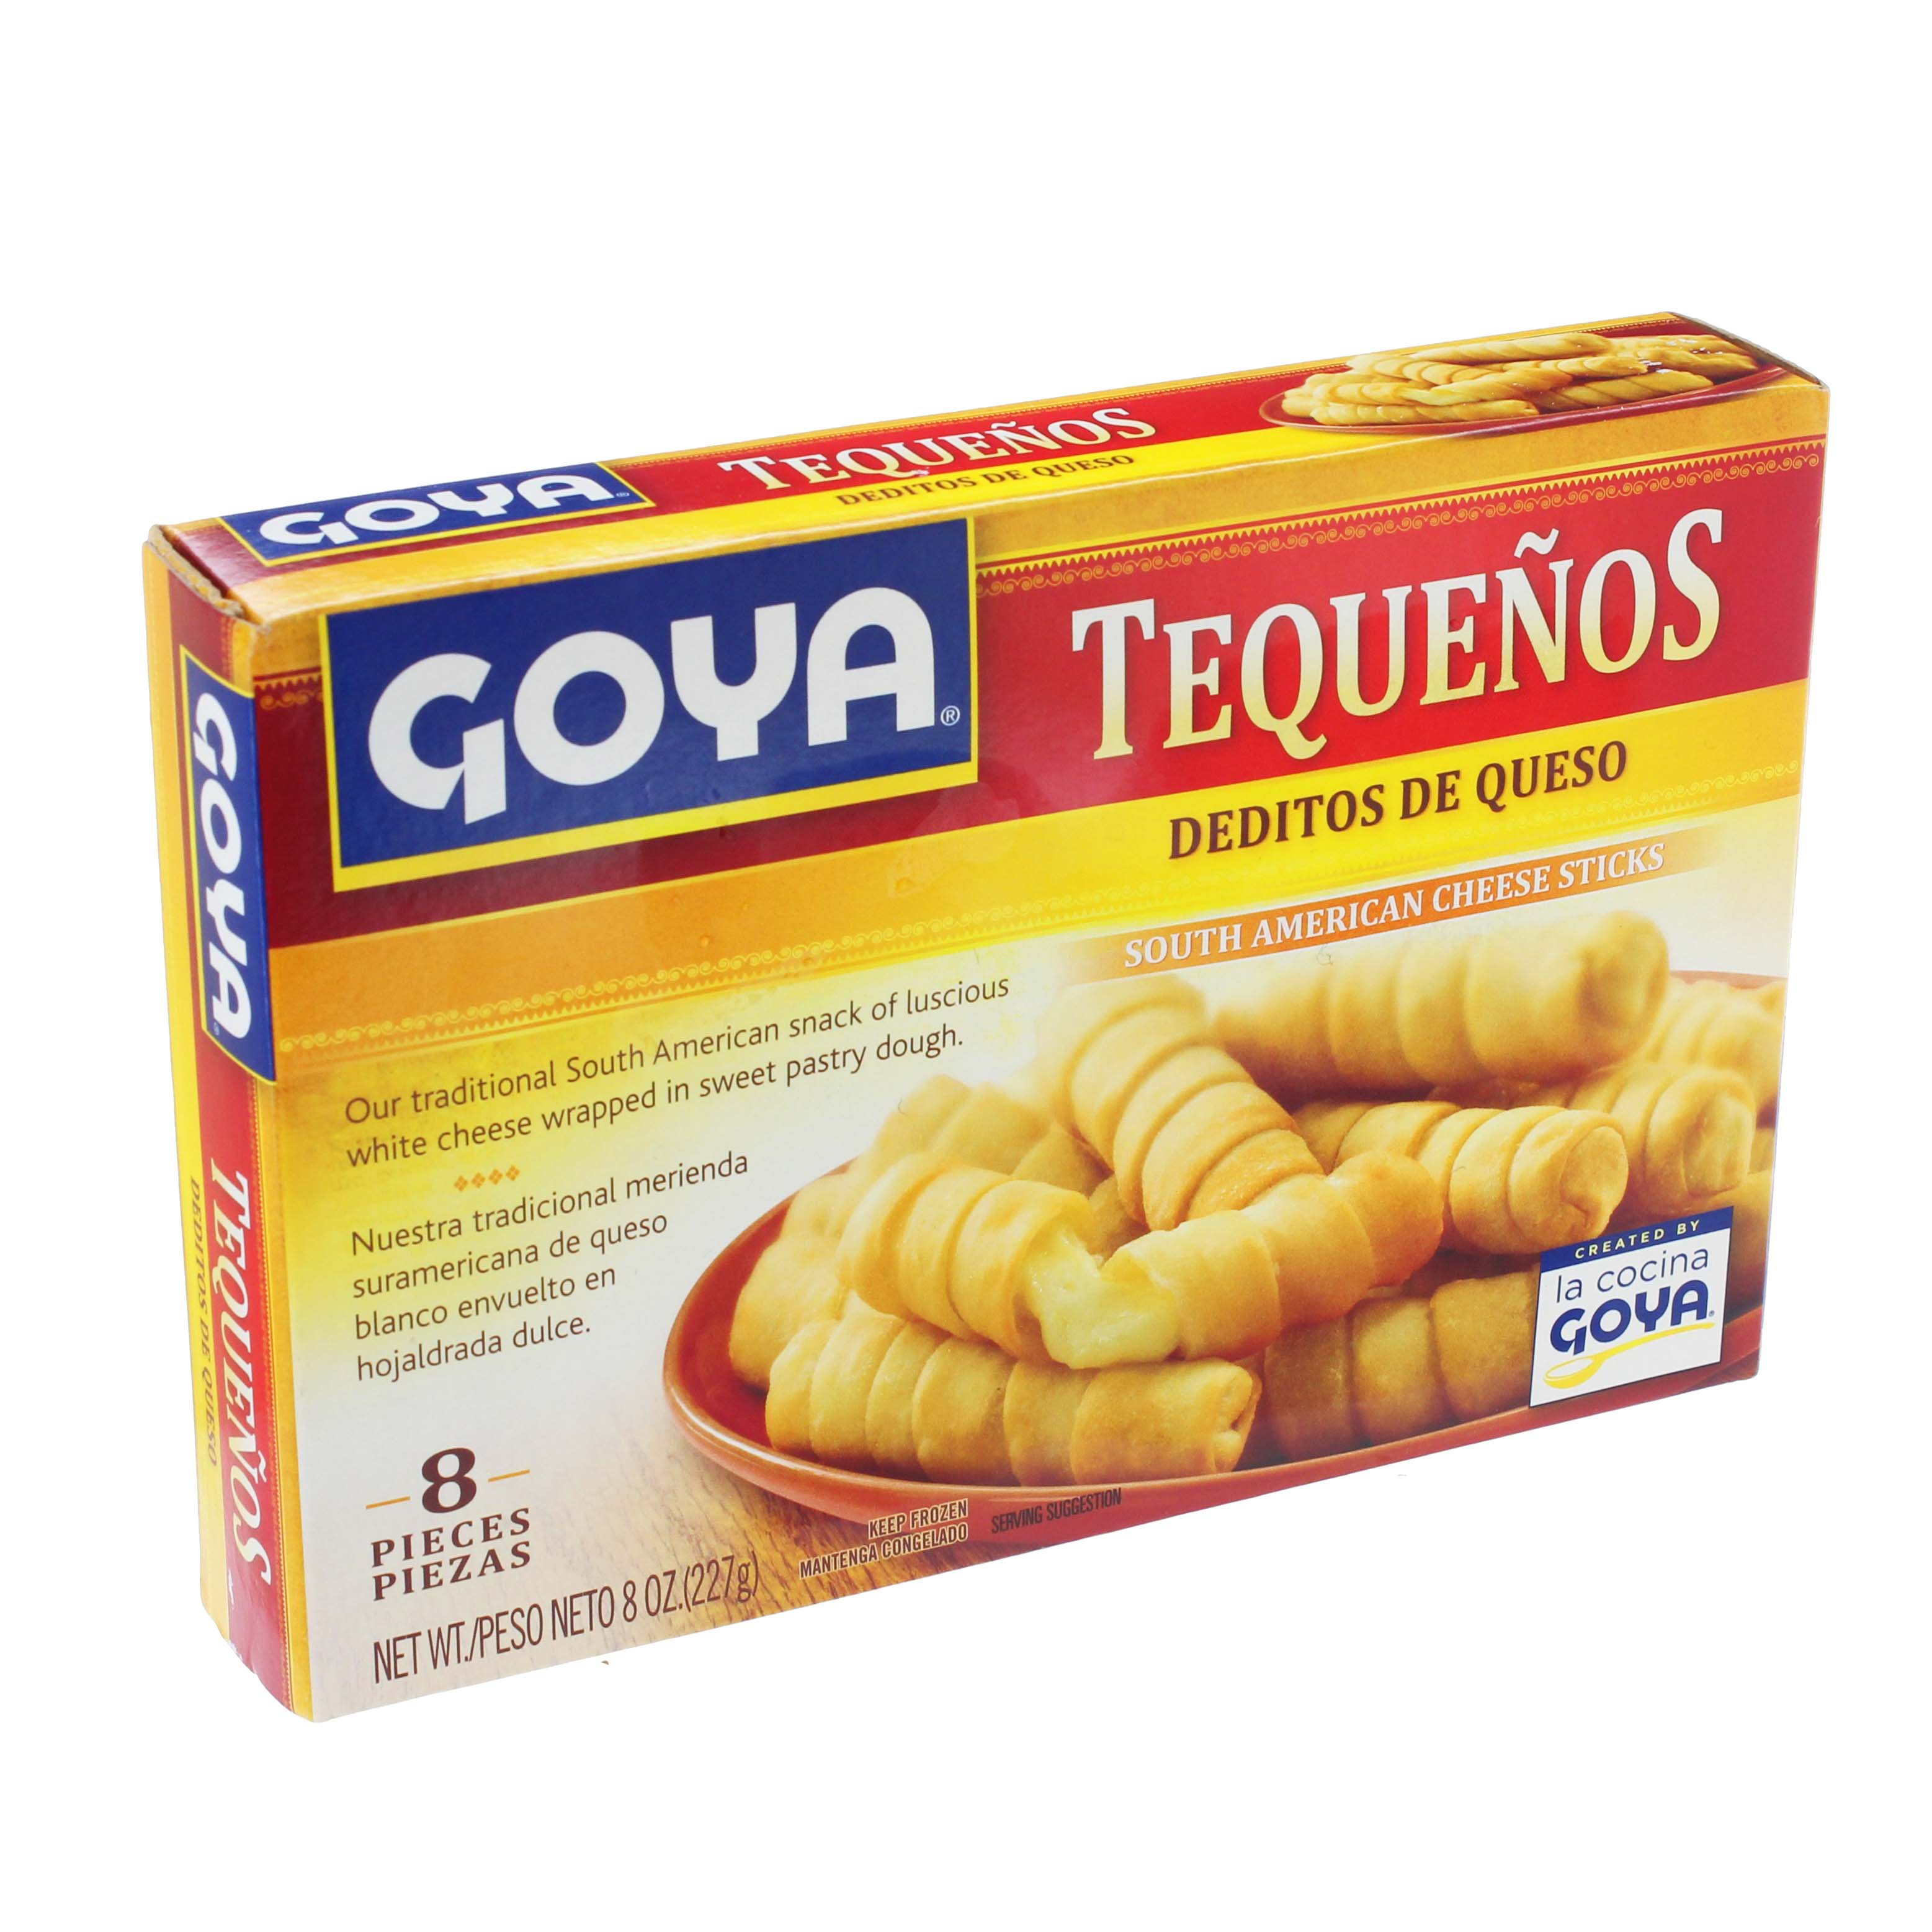 Appetizers - Goya South Cheese Tequenos at H-E-B Sticks Shop American